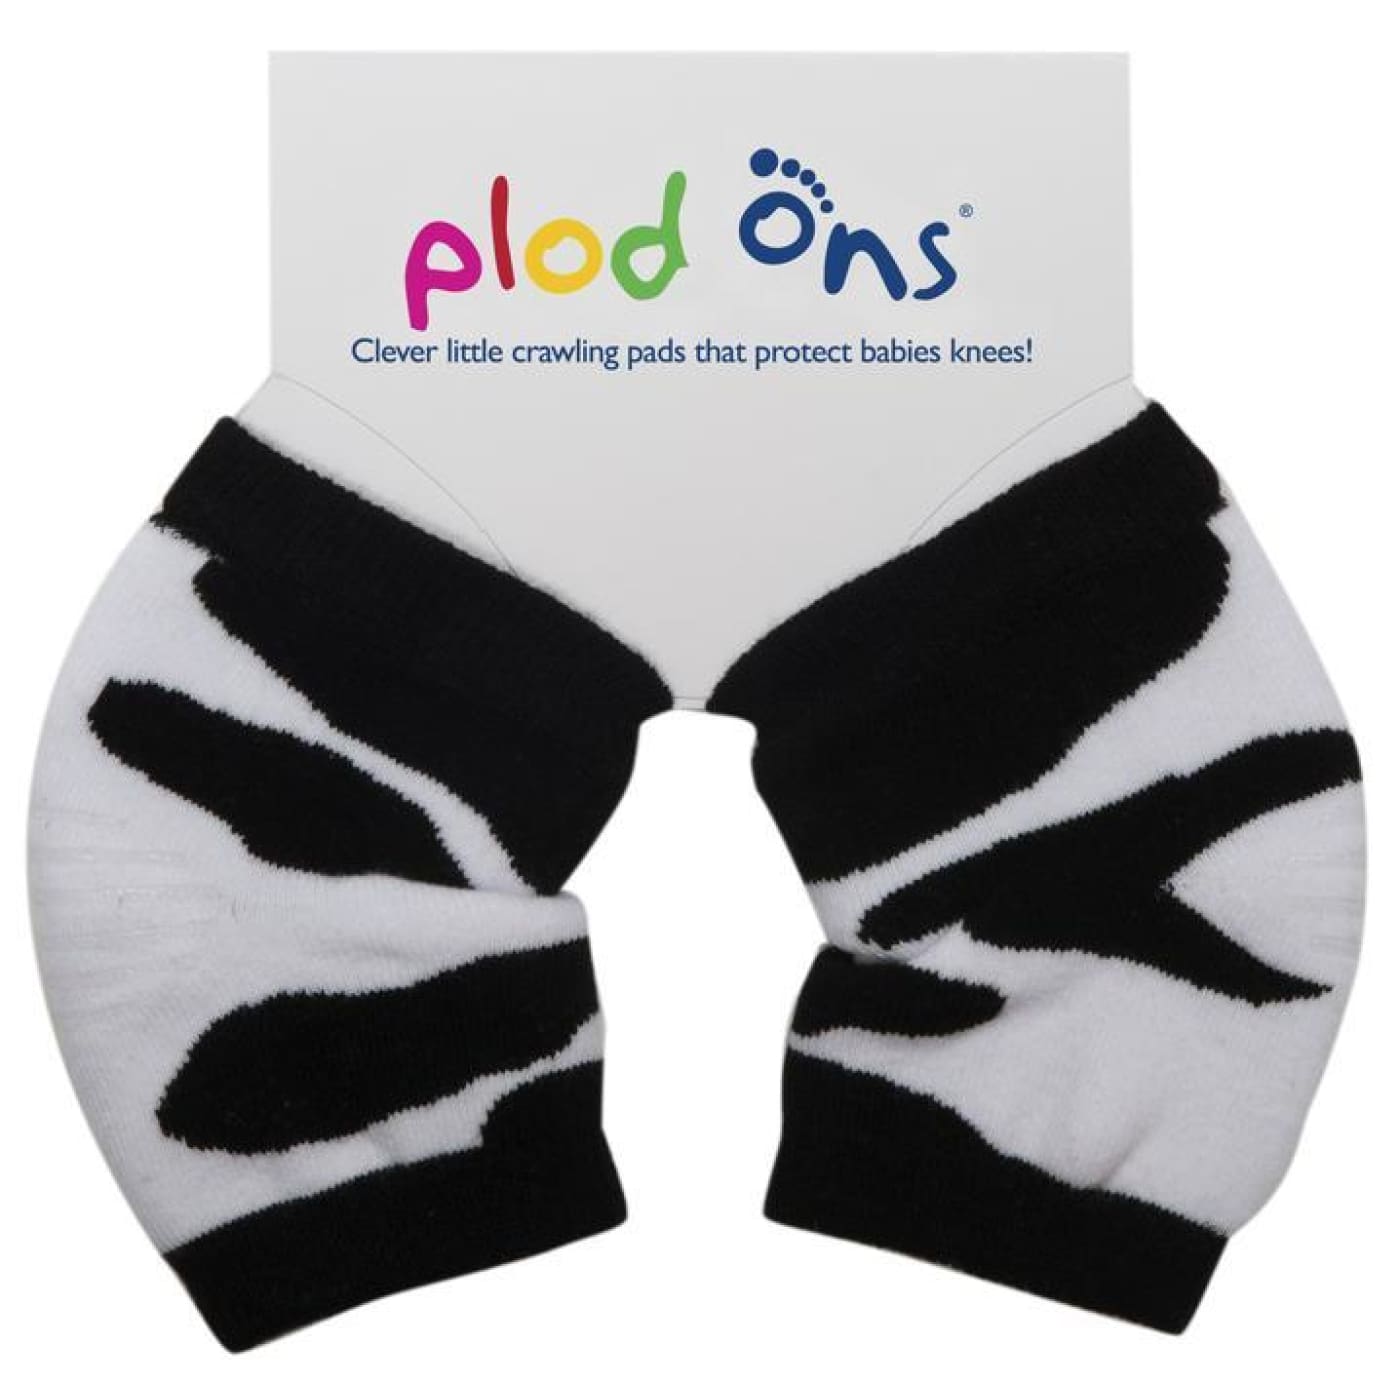 Plod-Ons Designer - Cow - BABY & TODDLER CLOTHING - MITTENS/SOCKS/SHOES